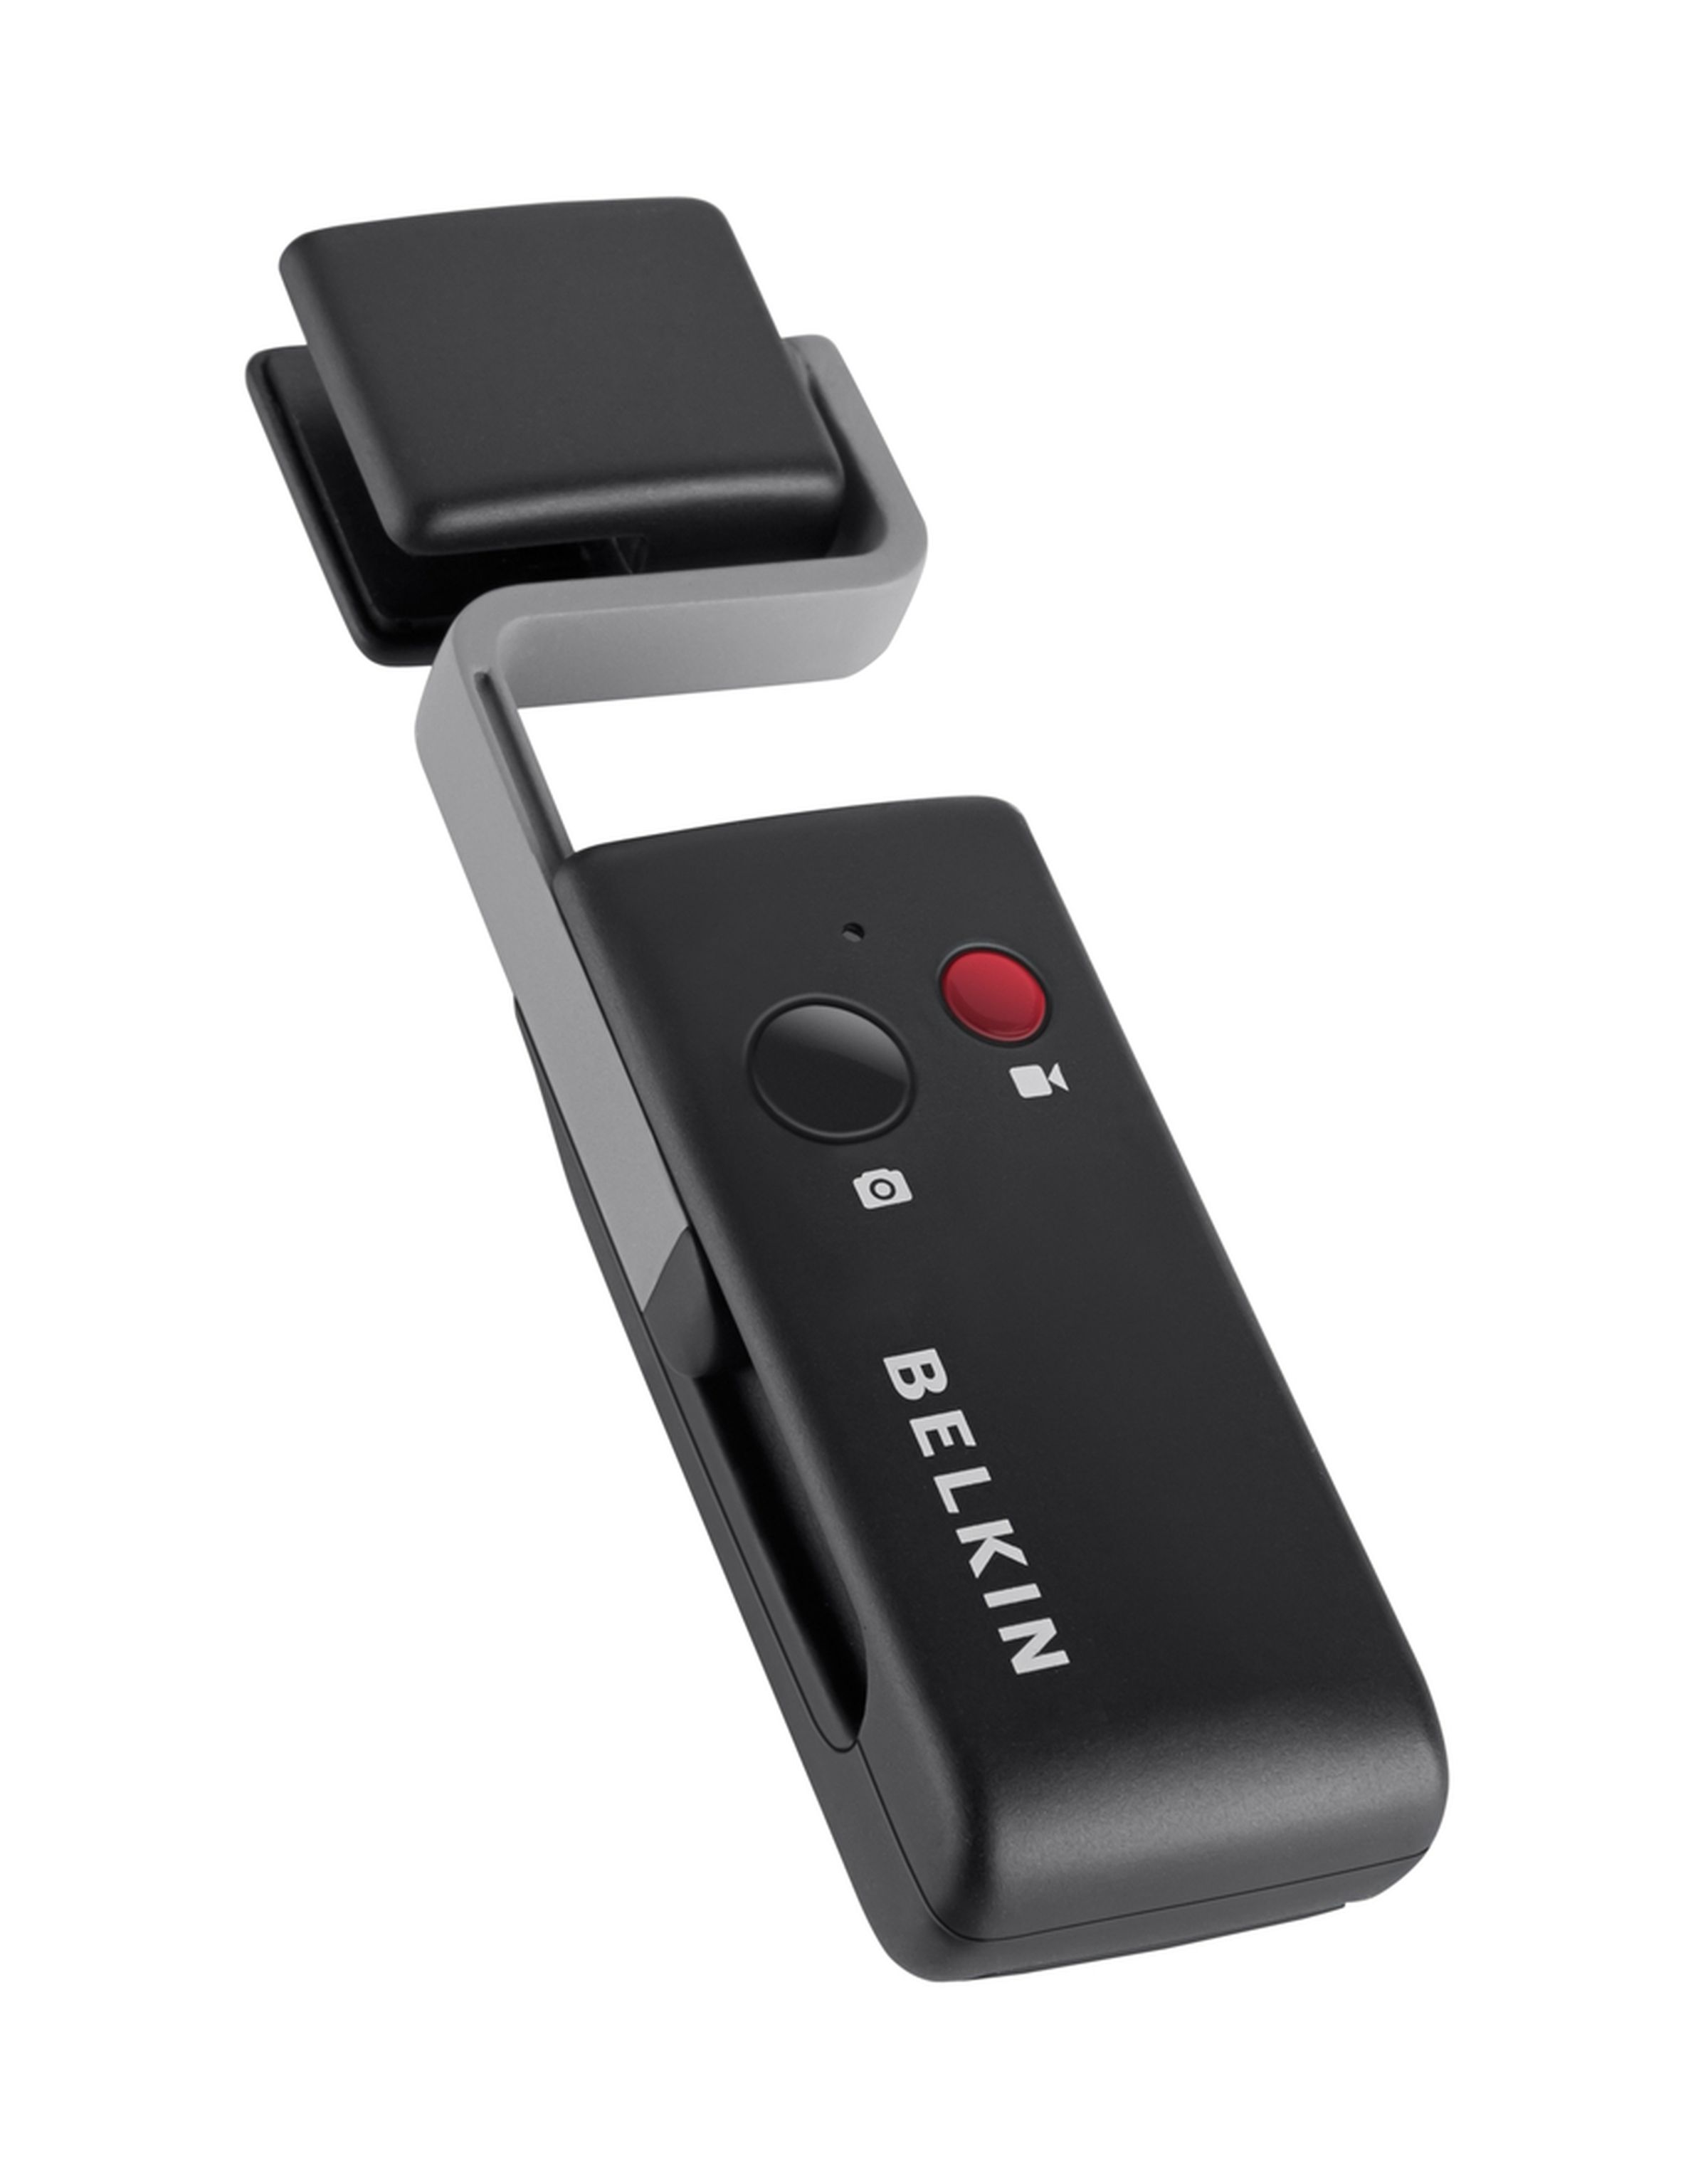 Belkin LiveAction Grip and LiveAction Remote Gallery